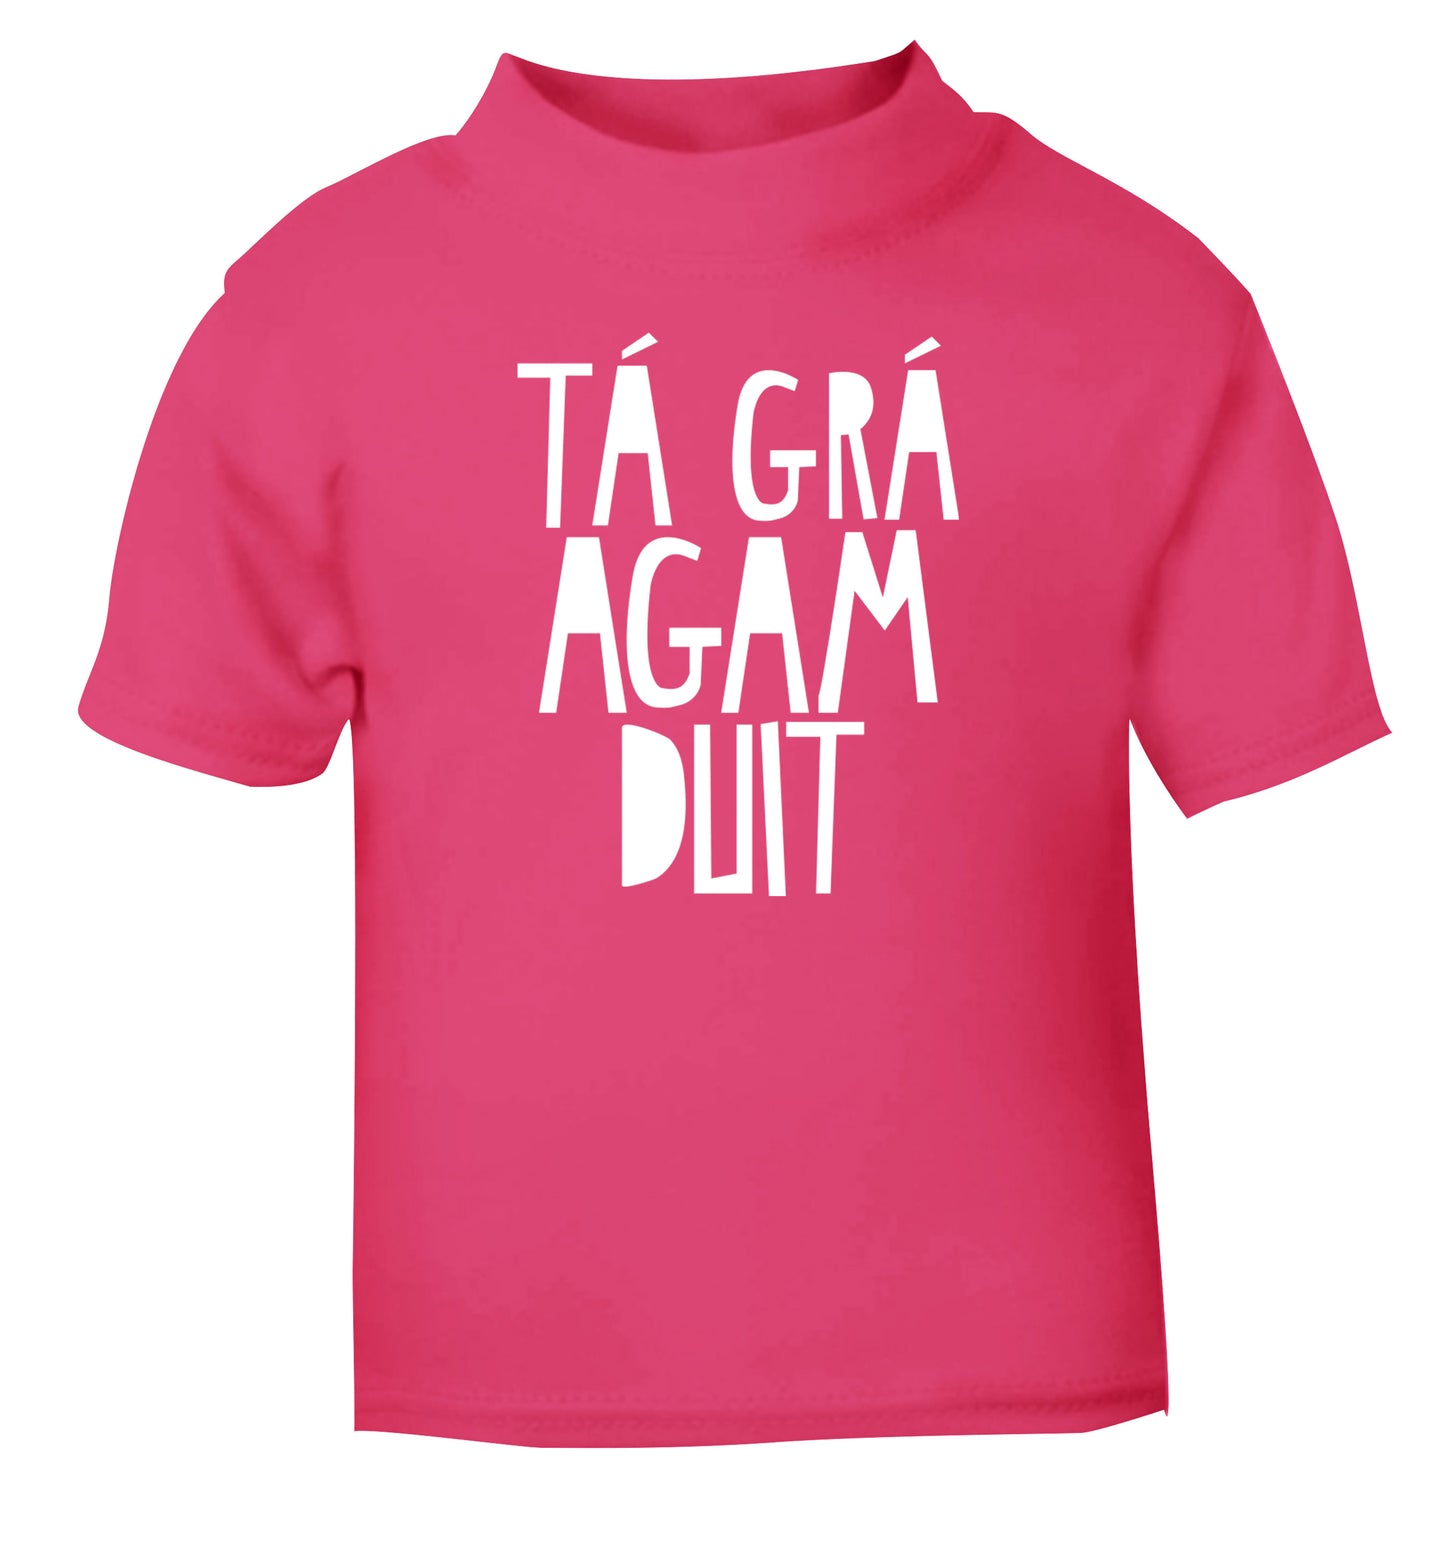 T‡ gr‡ agam duit - I love you pink Baby Toddler Tshirt 2 Years